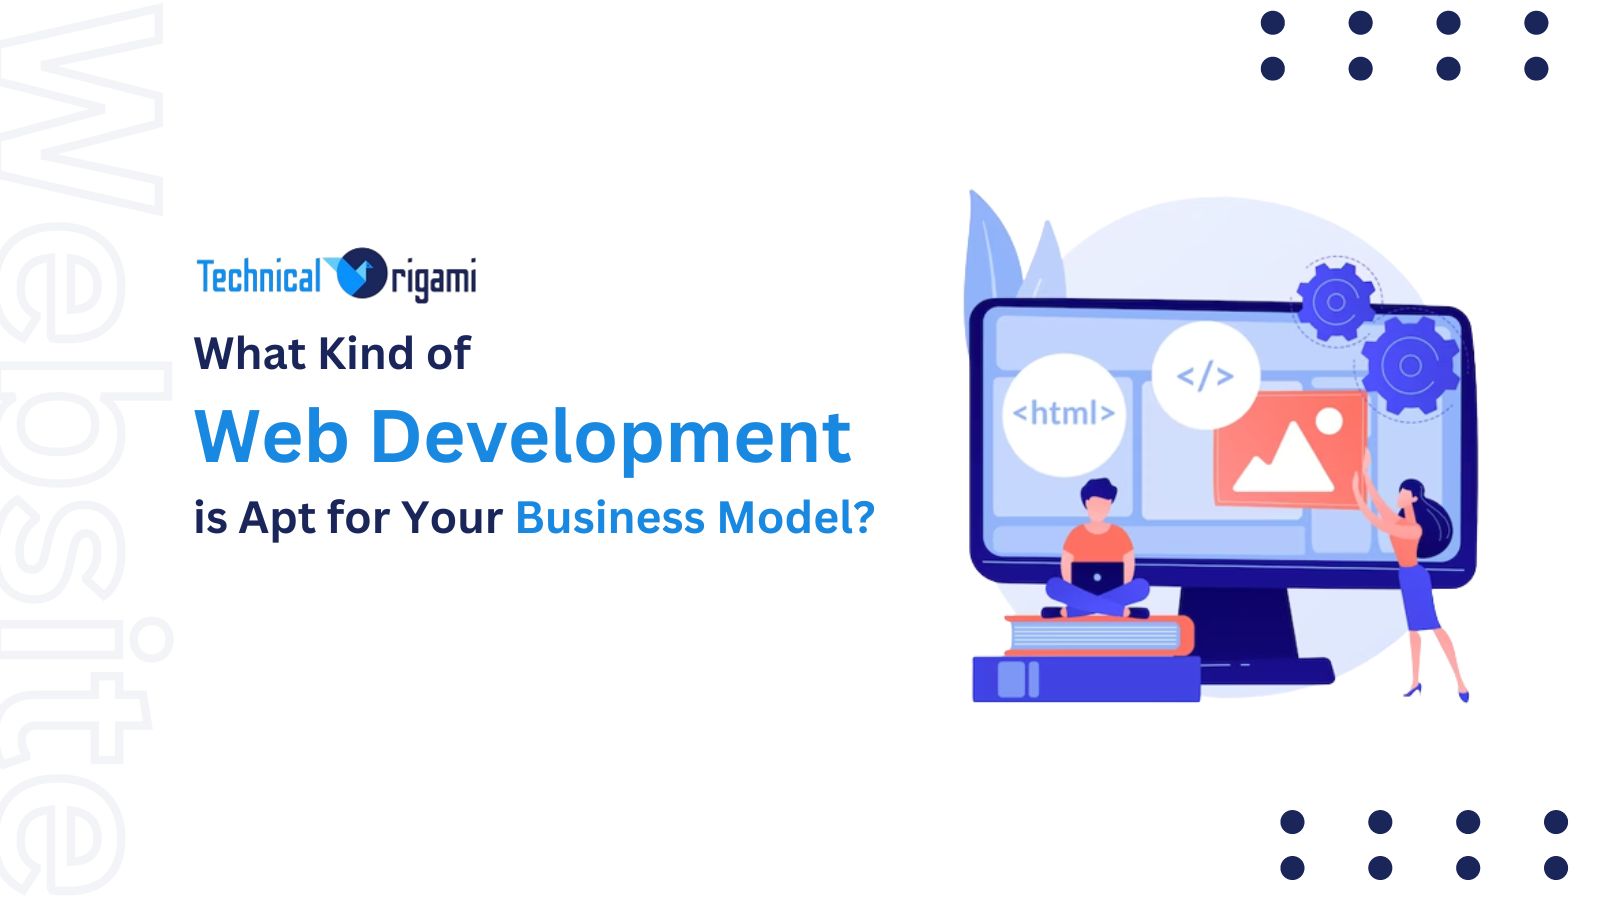 What Kind of Web Development is Apt for Your Business Model?